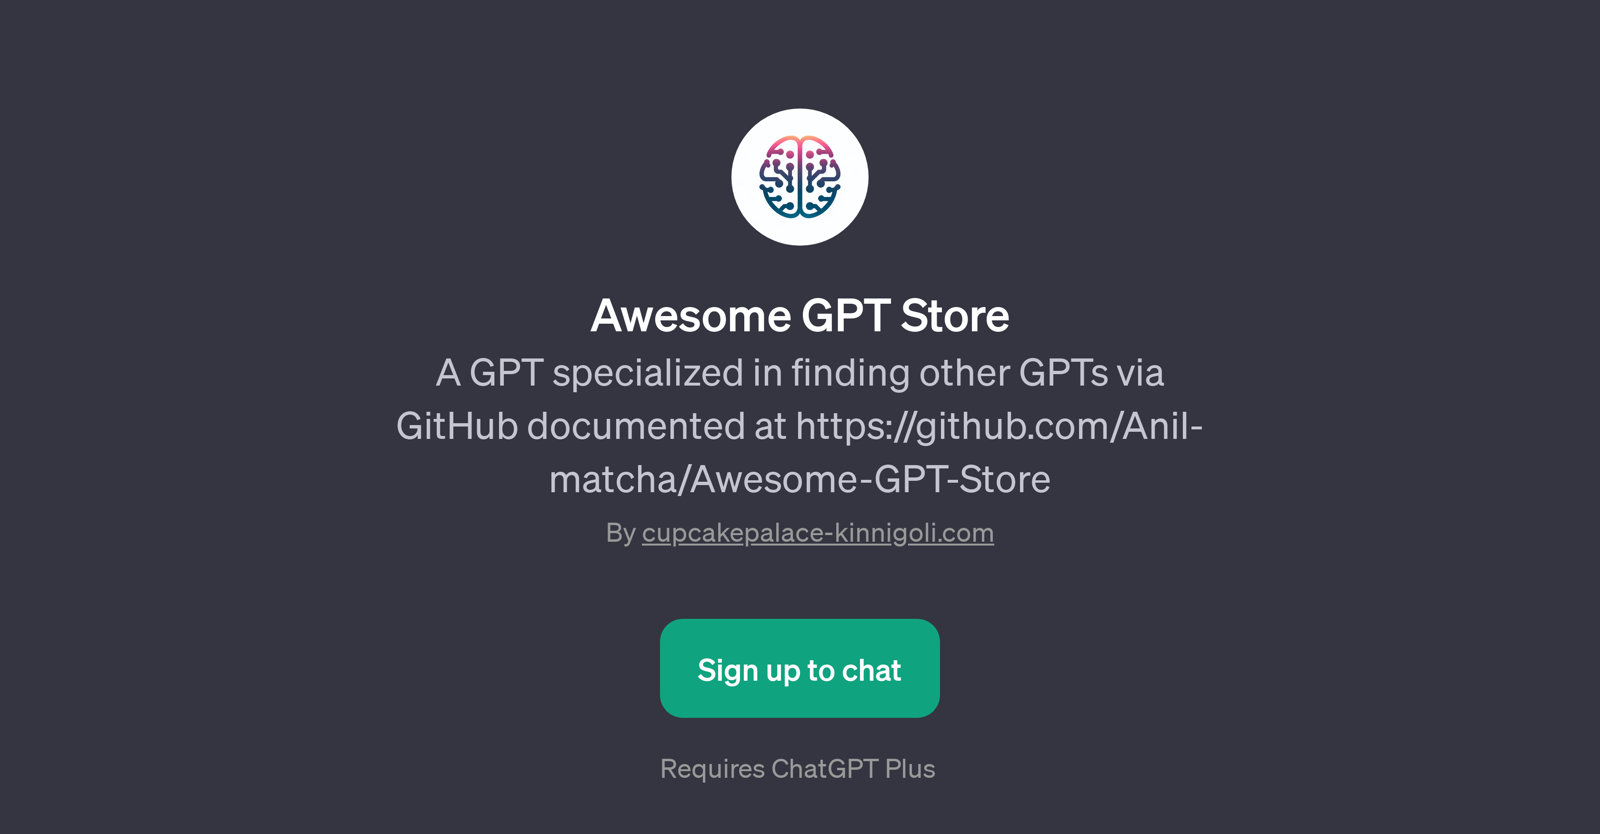 Awesome GPT Store website